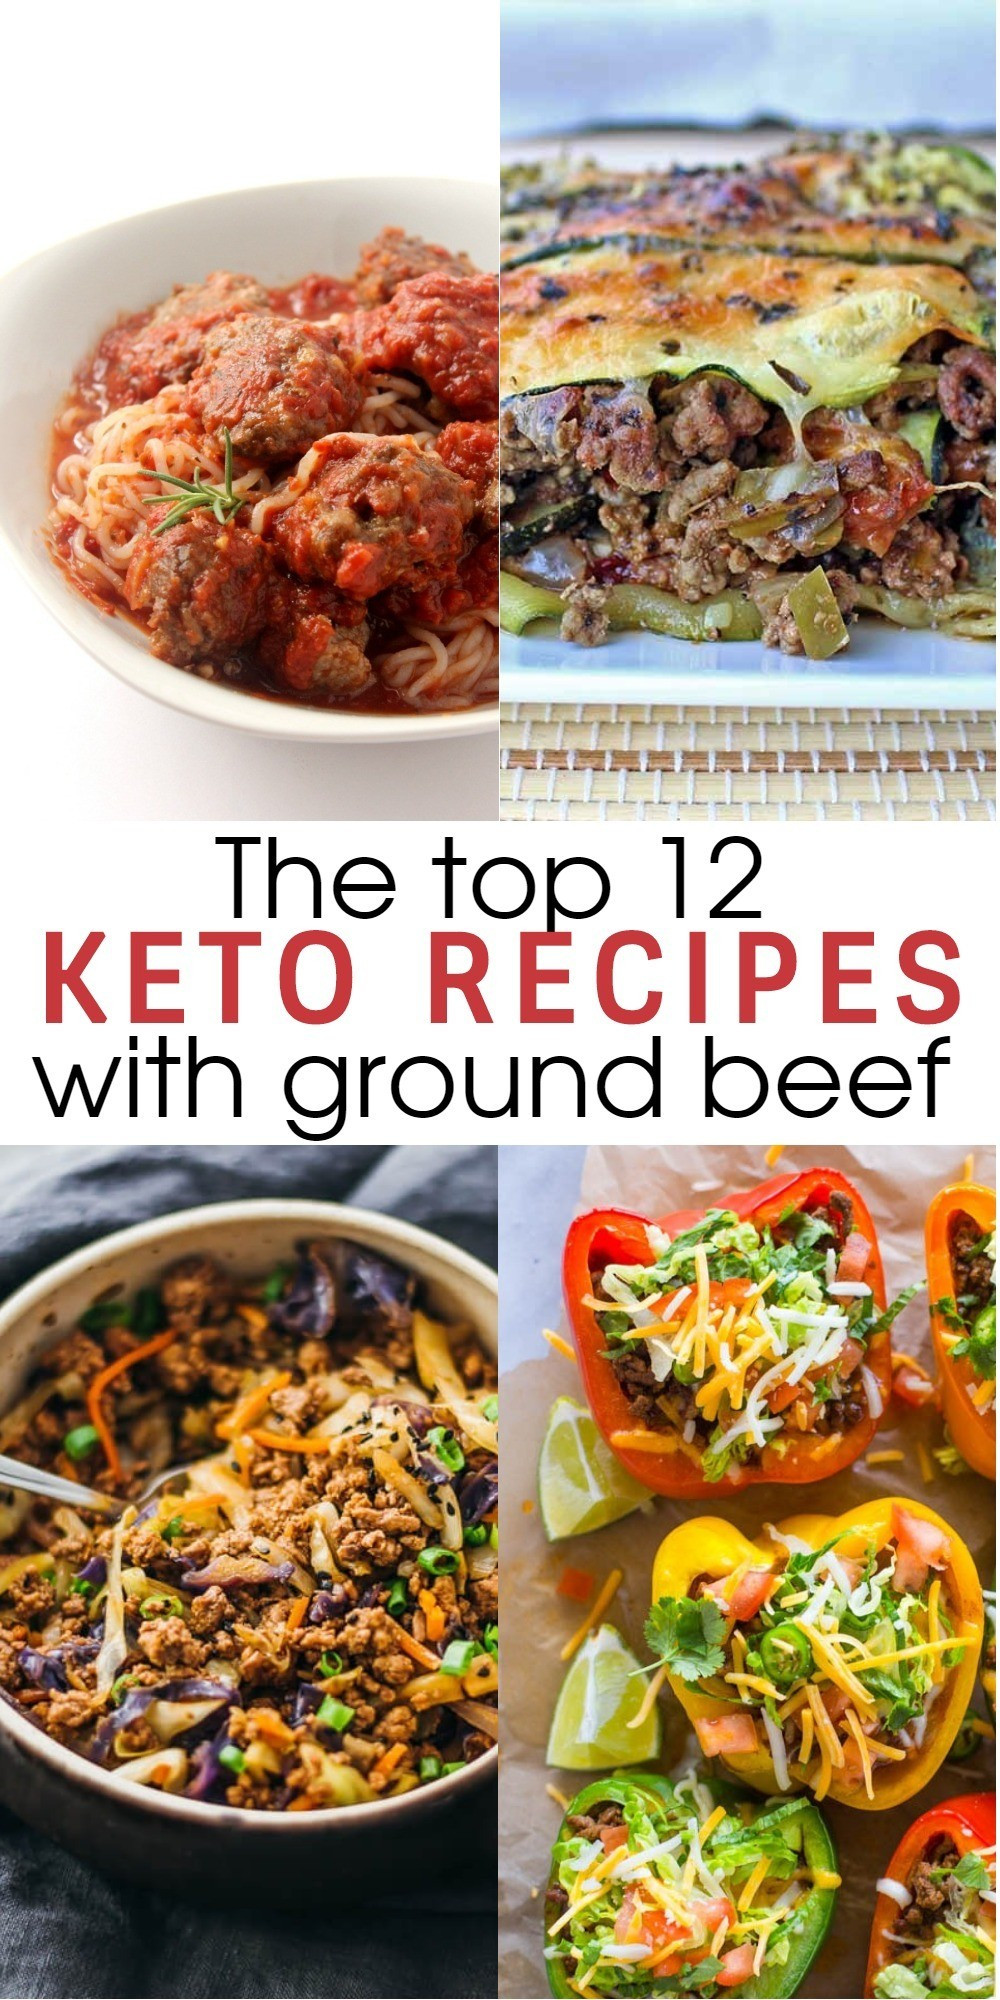 Hamburger Meat Keto Recipes
 12 Flavorful and Easy Keto Recipes With Ground Beef To Try